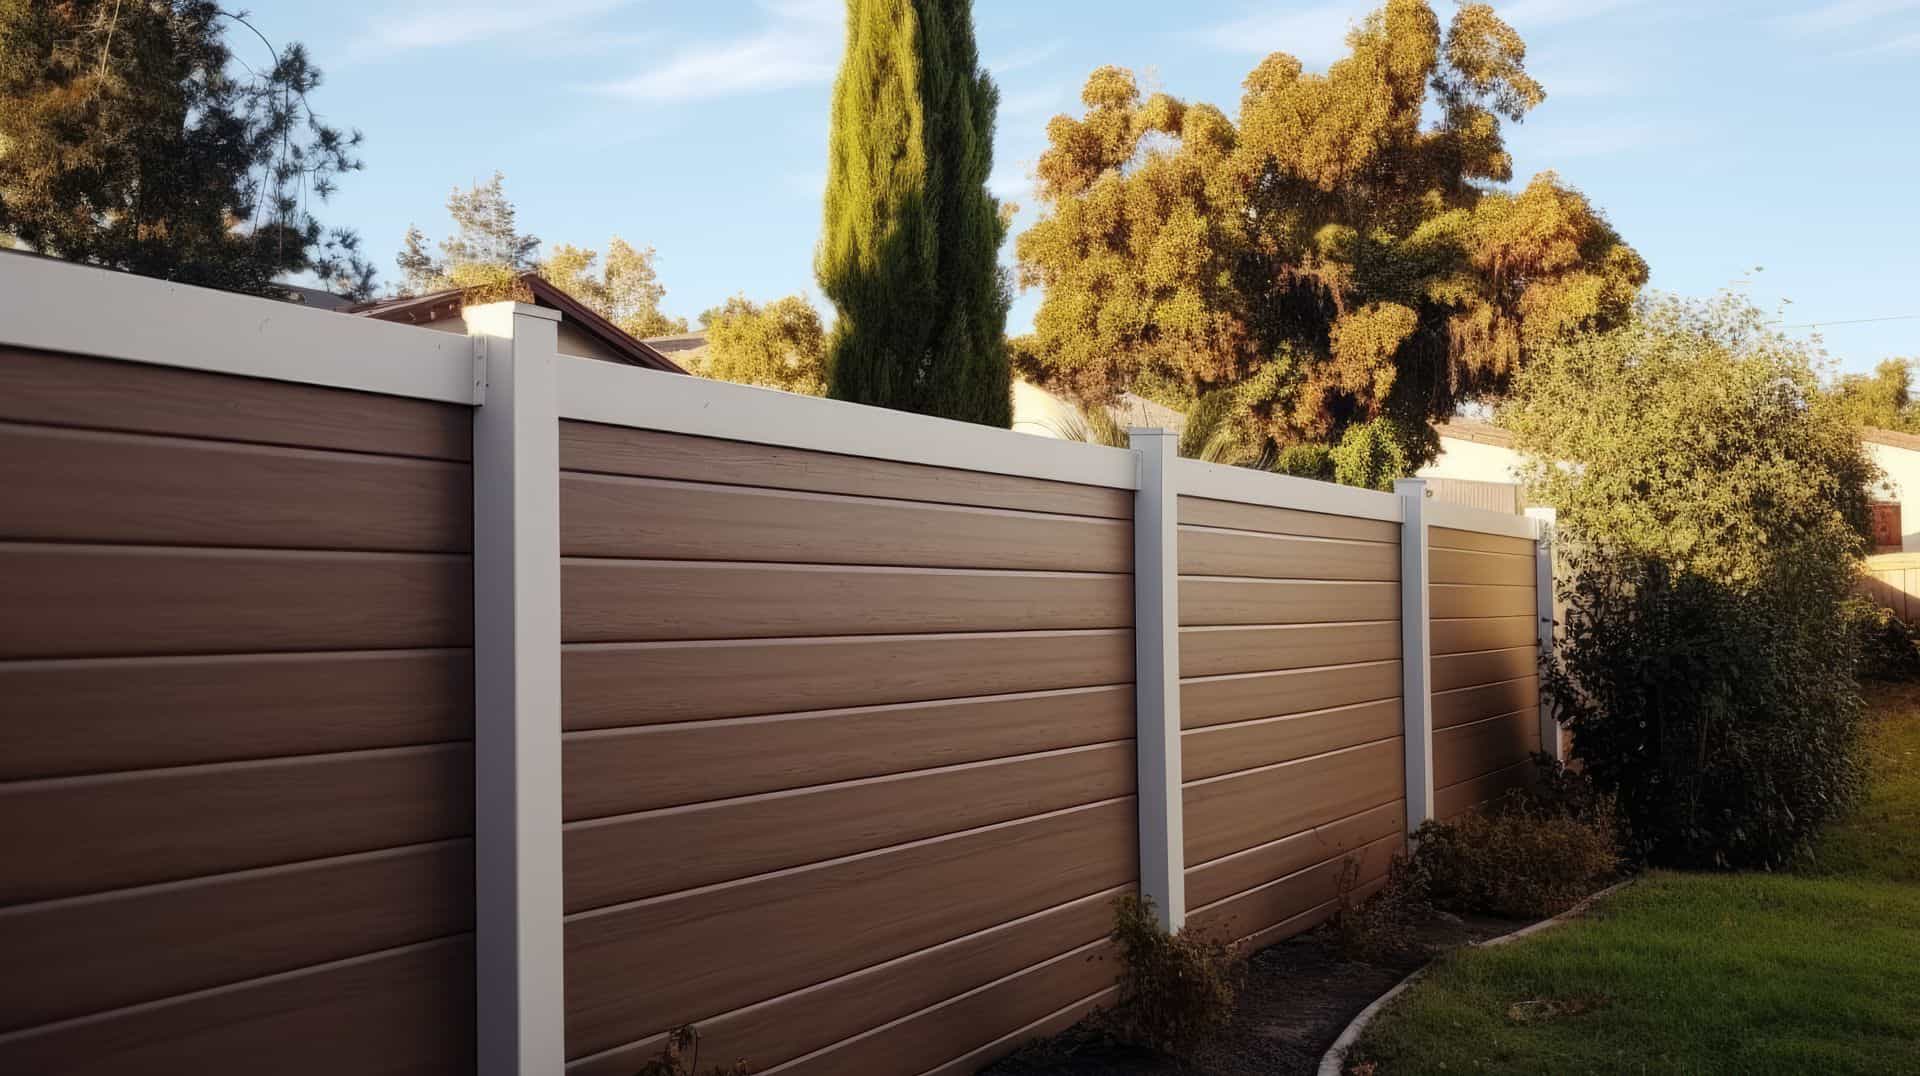 Vinyl privacy two-tone beige and brown fence in backyard with lush grassy lawn multiple trees and small plants.